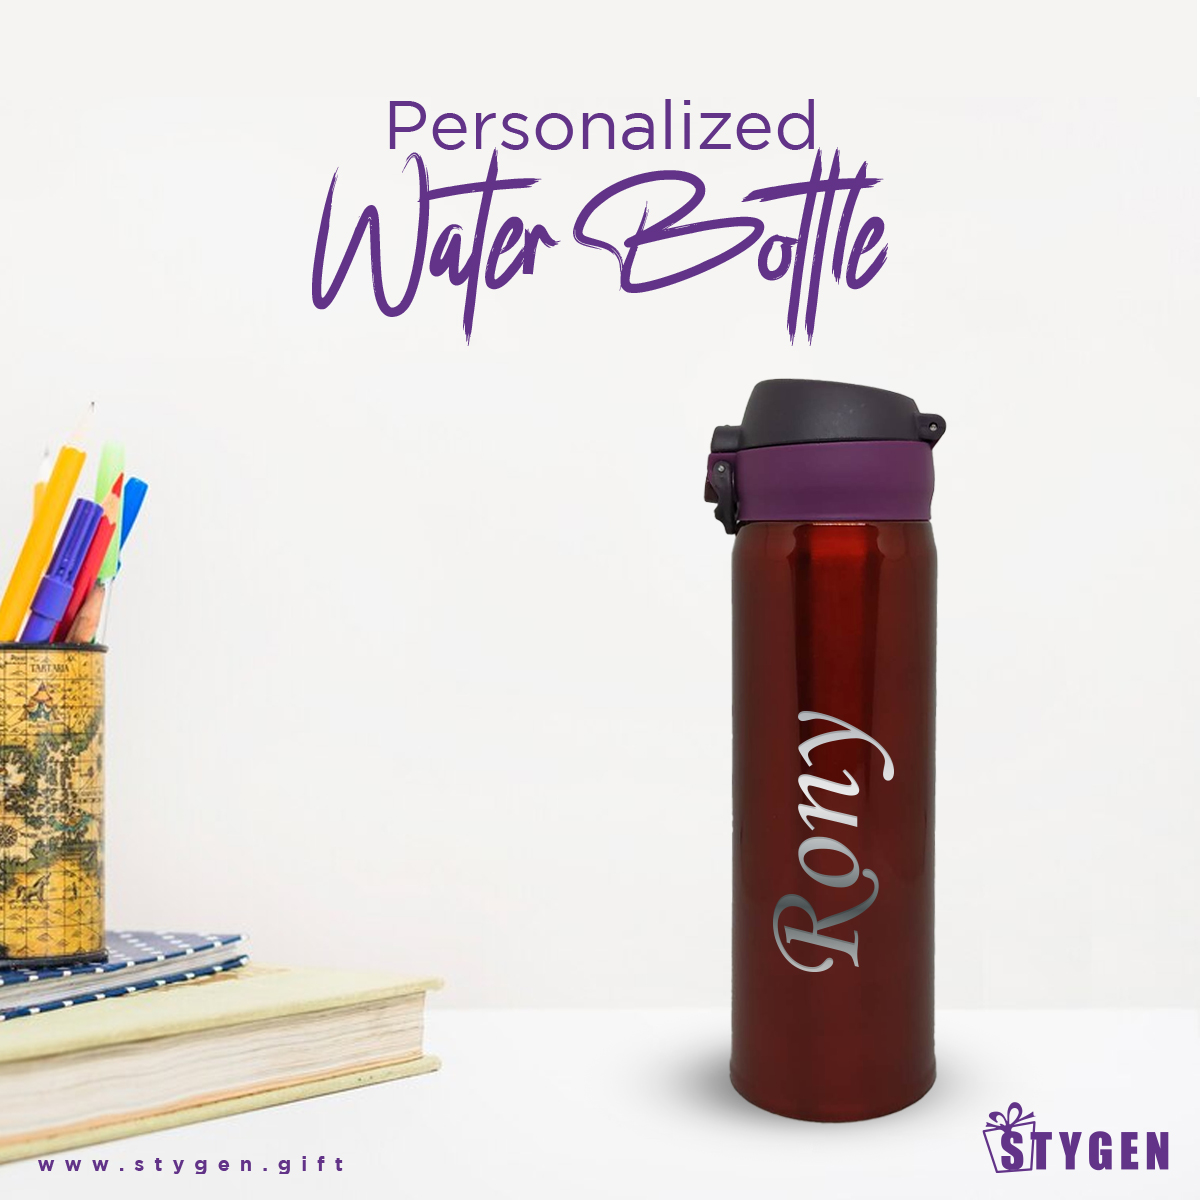 Personalized Thermos Water Bottle for your loved one (08)